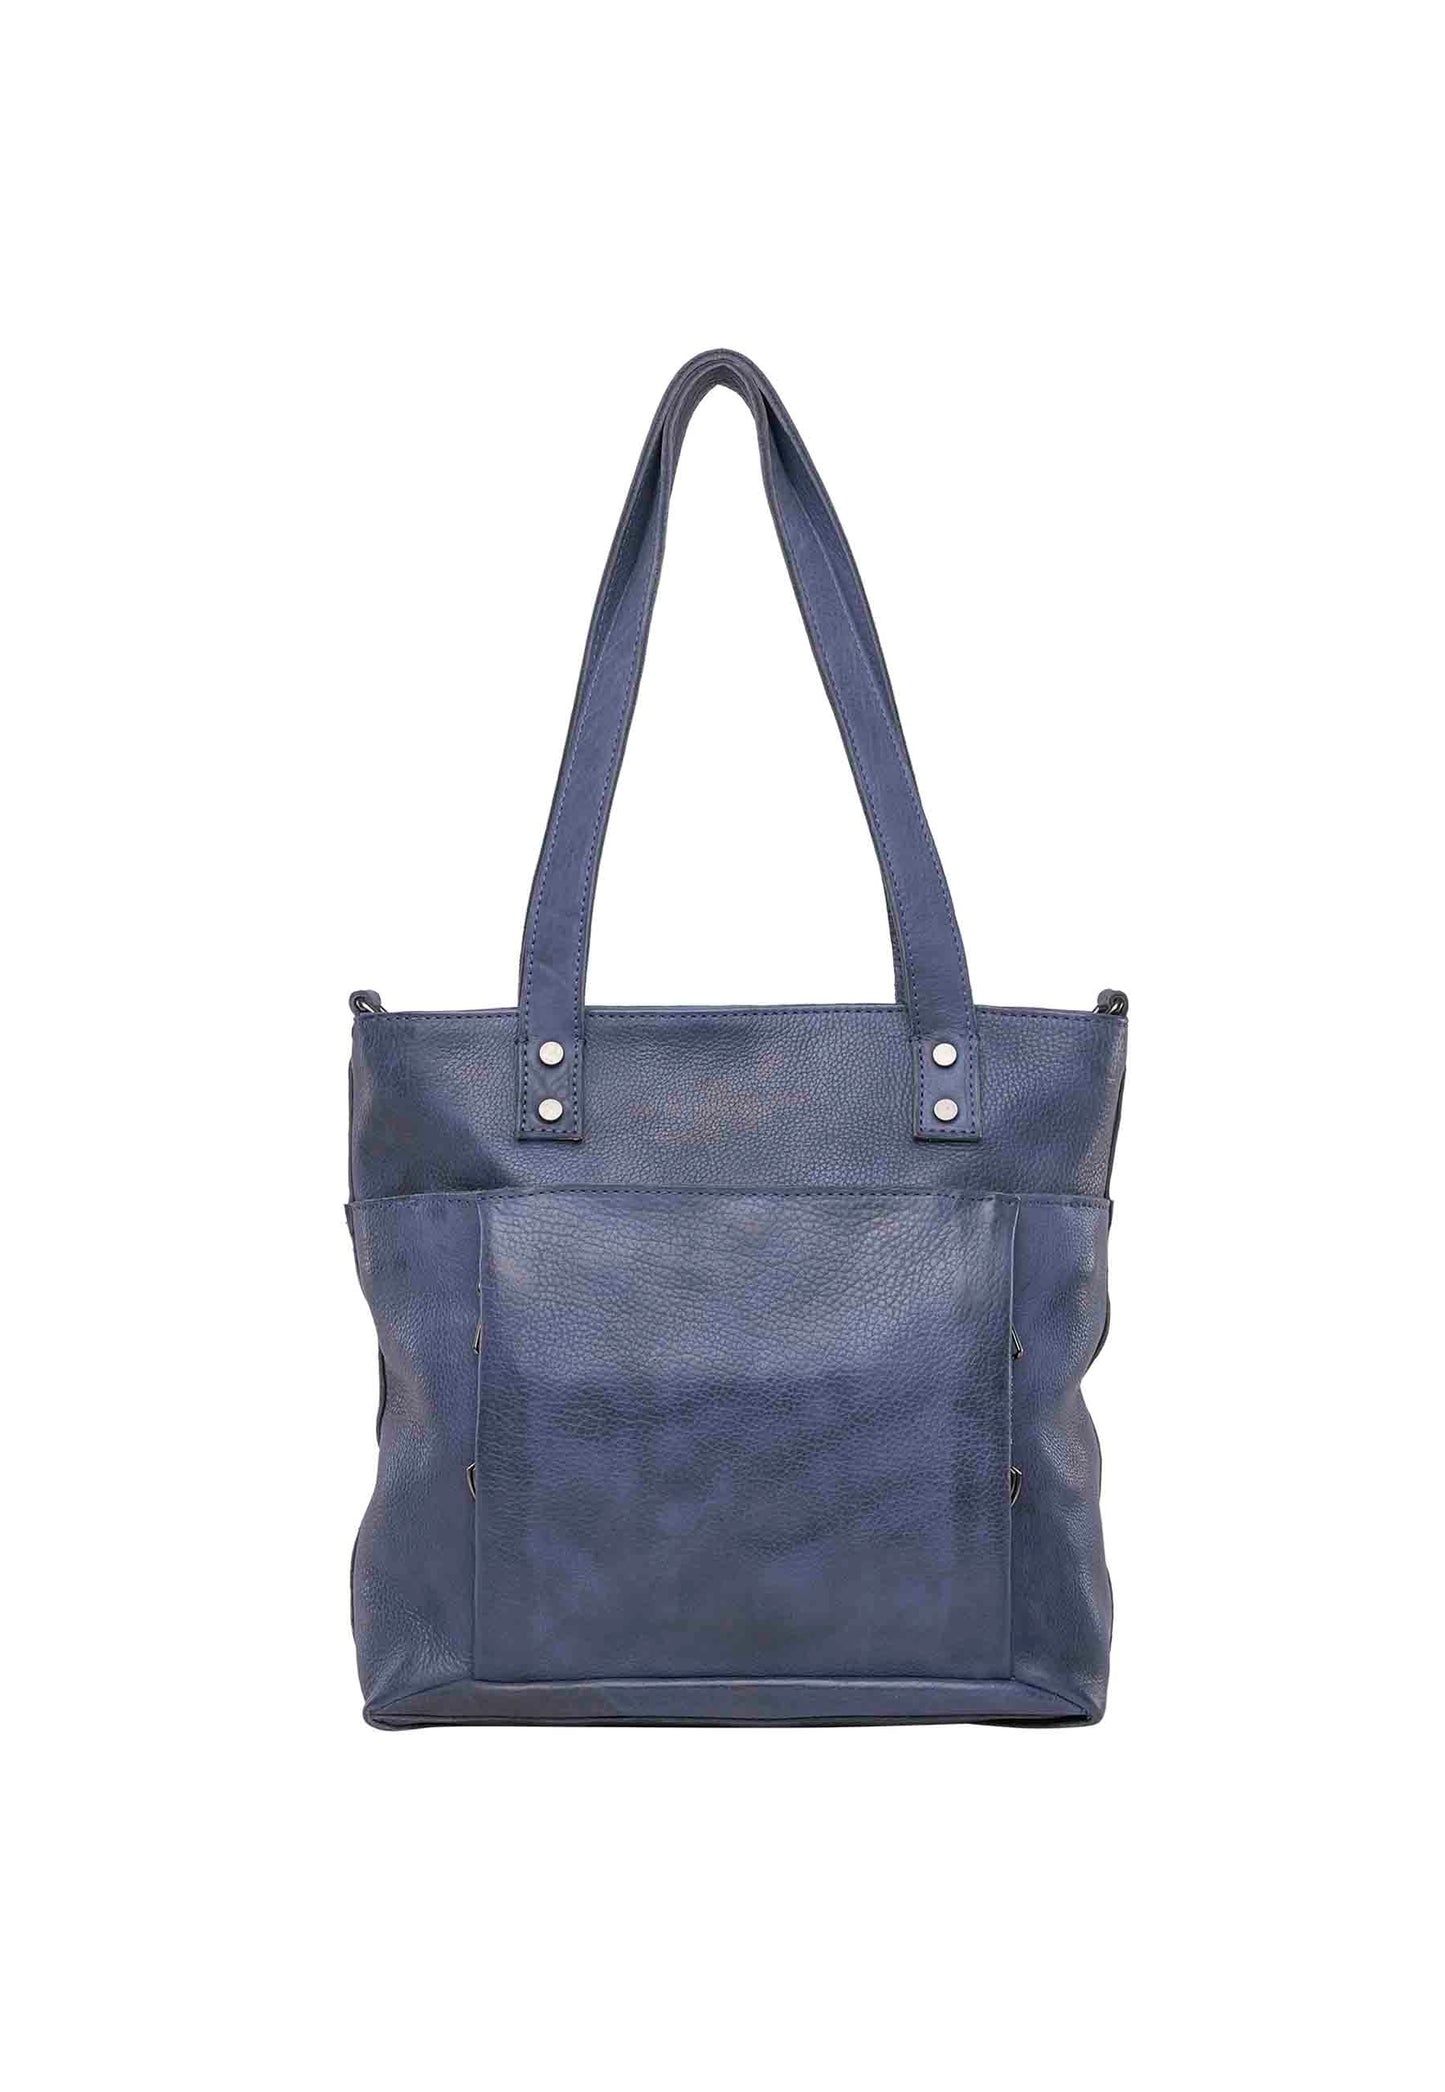 blue leather conceal carry purse